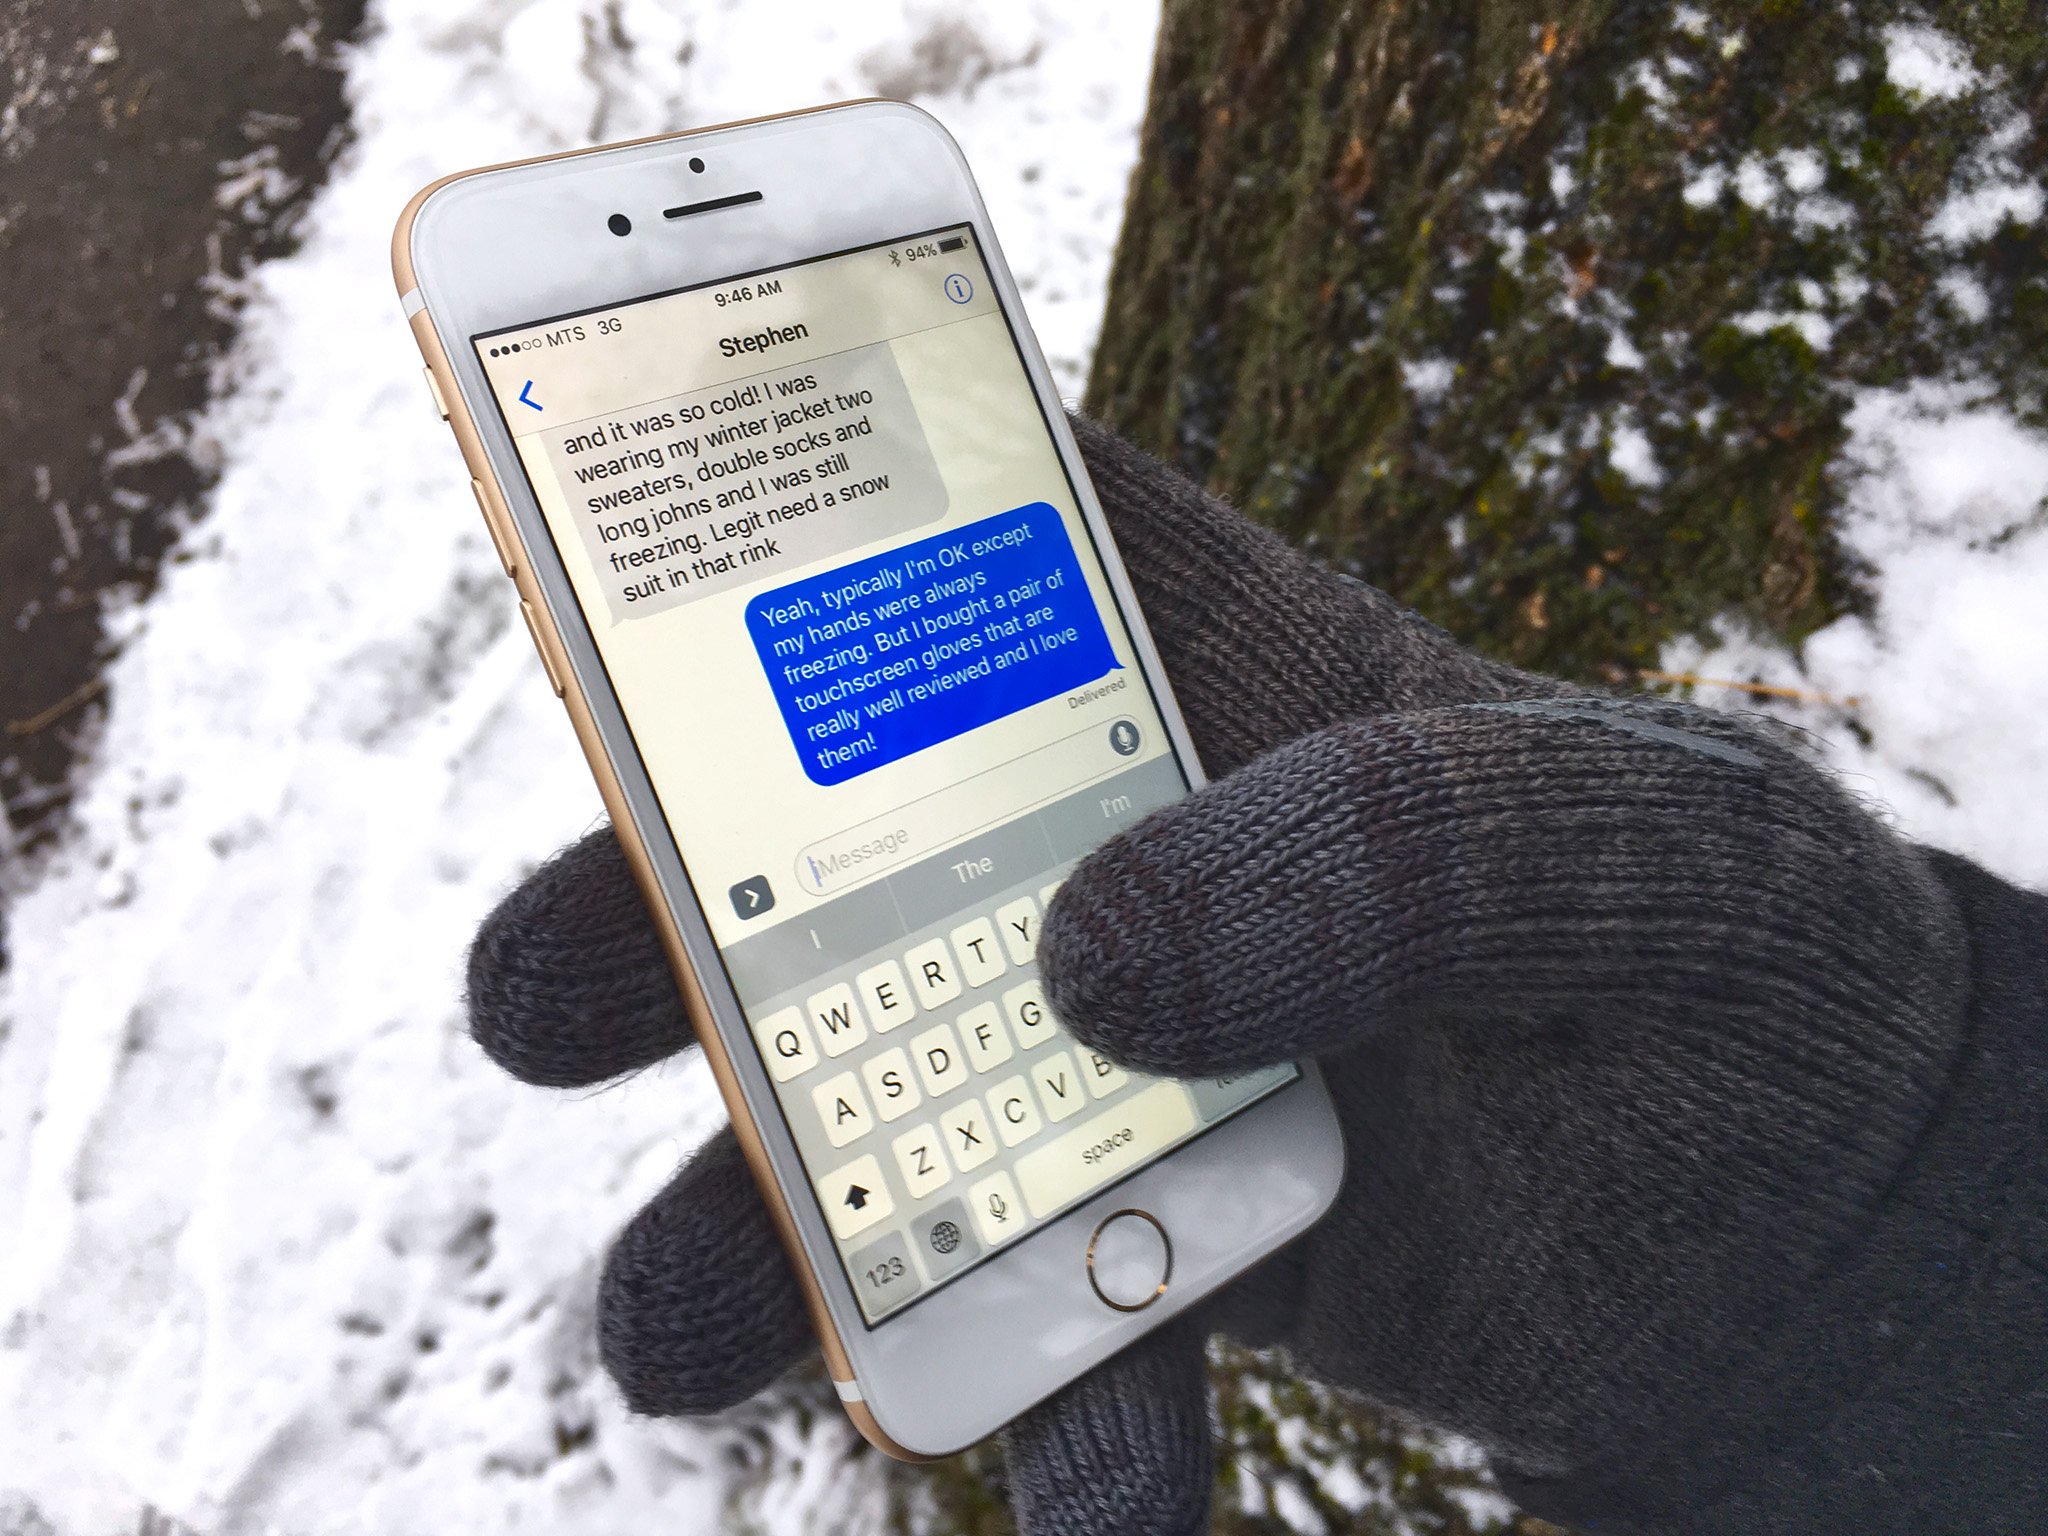 iMessage in the winter